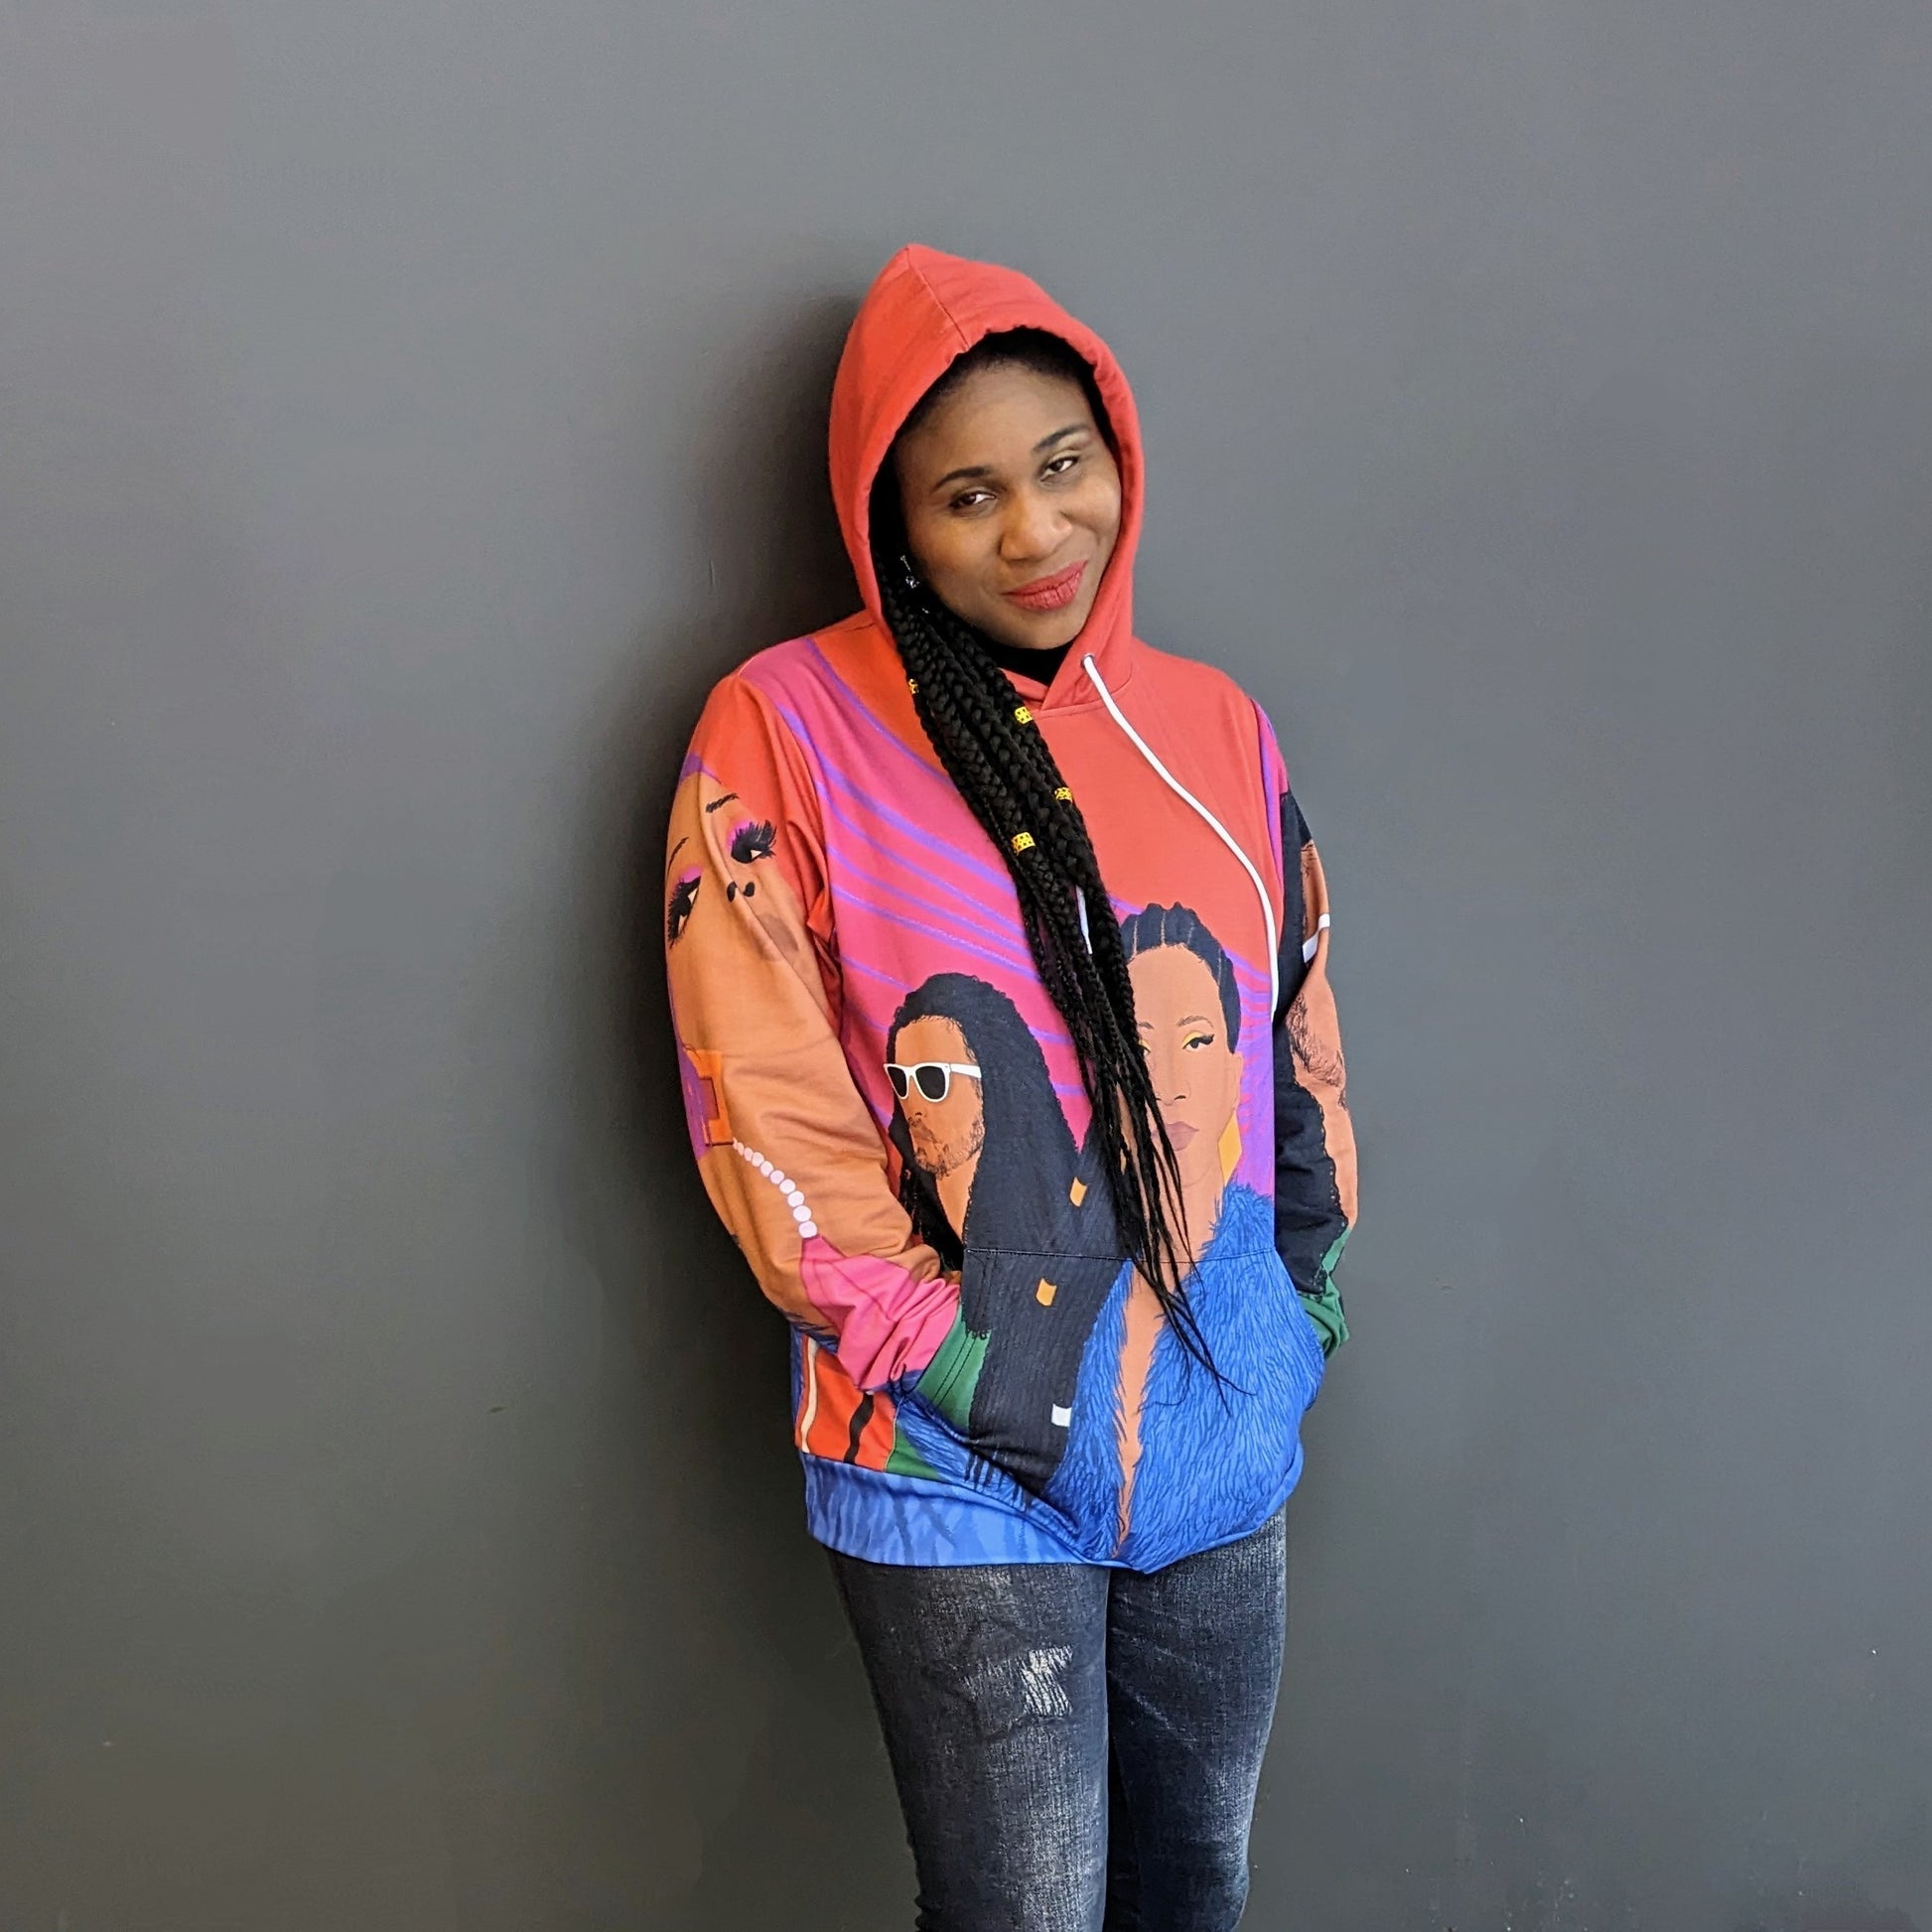 Lachi, a black woman with cornrows, poses wearing a colorful sweater featuring the album art for her single Black Girl Cornrows which has drawn profiles of Lachi and the other artists over an orange background